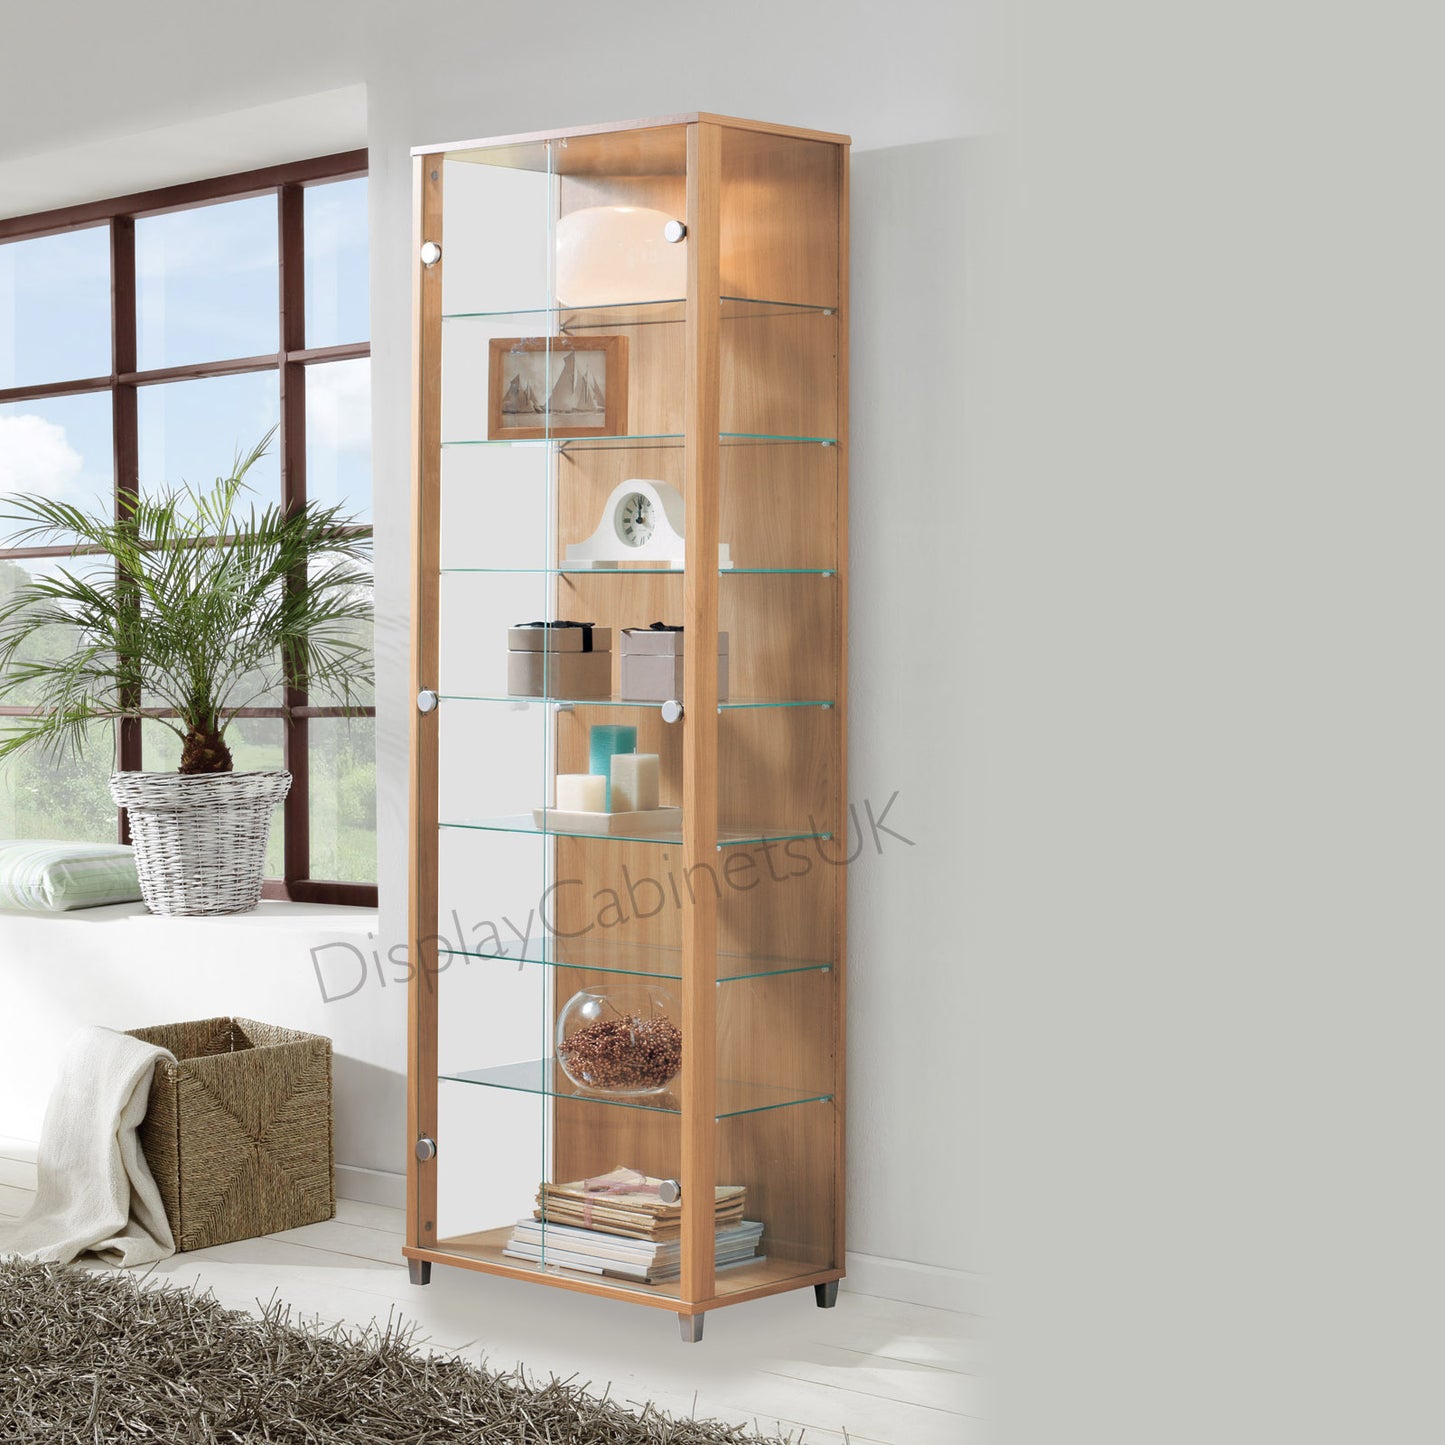 Home Oak Effect Glass Display Cabinets: Single, Double or Corner